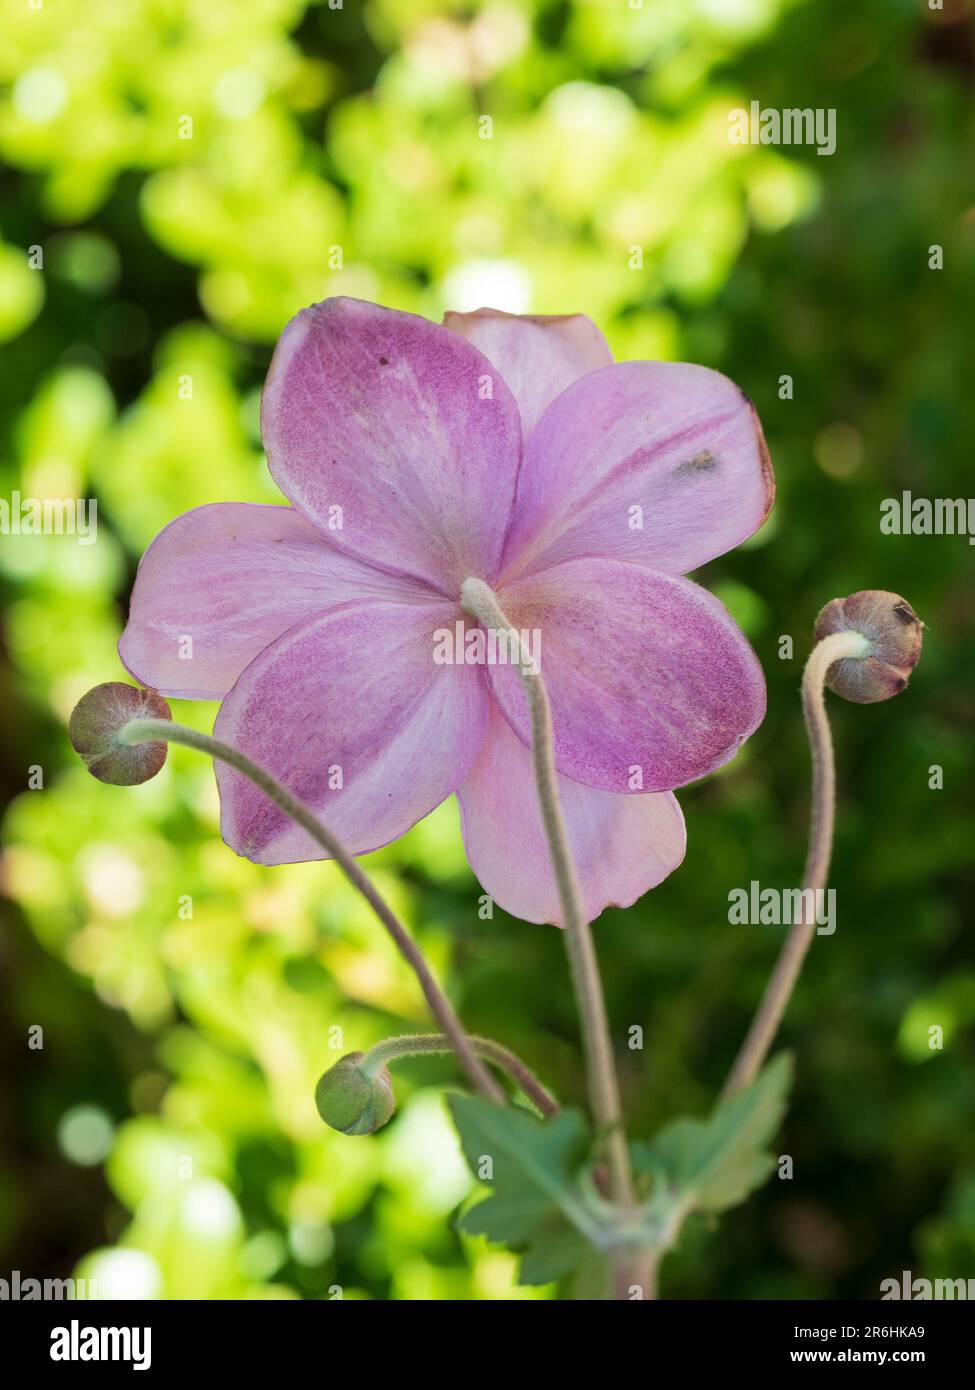 Willowy stemmed pink flower and buds, Japanese Windflower or anemone hupehensis, delightful closeup from behind, petals detail, Australia Stock Photo